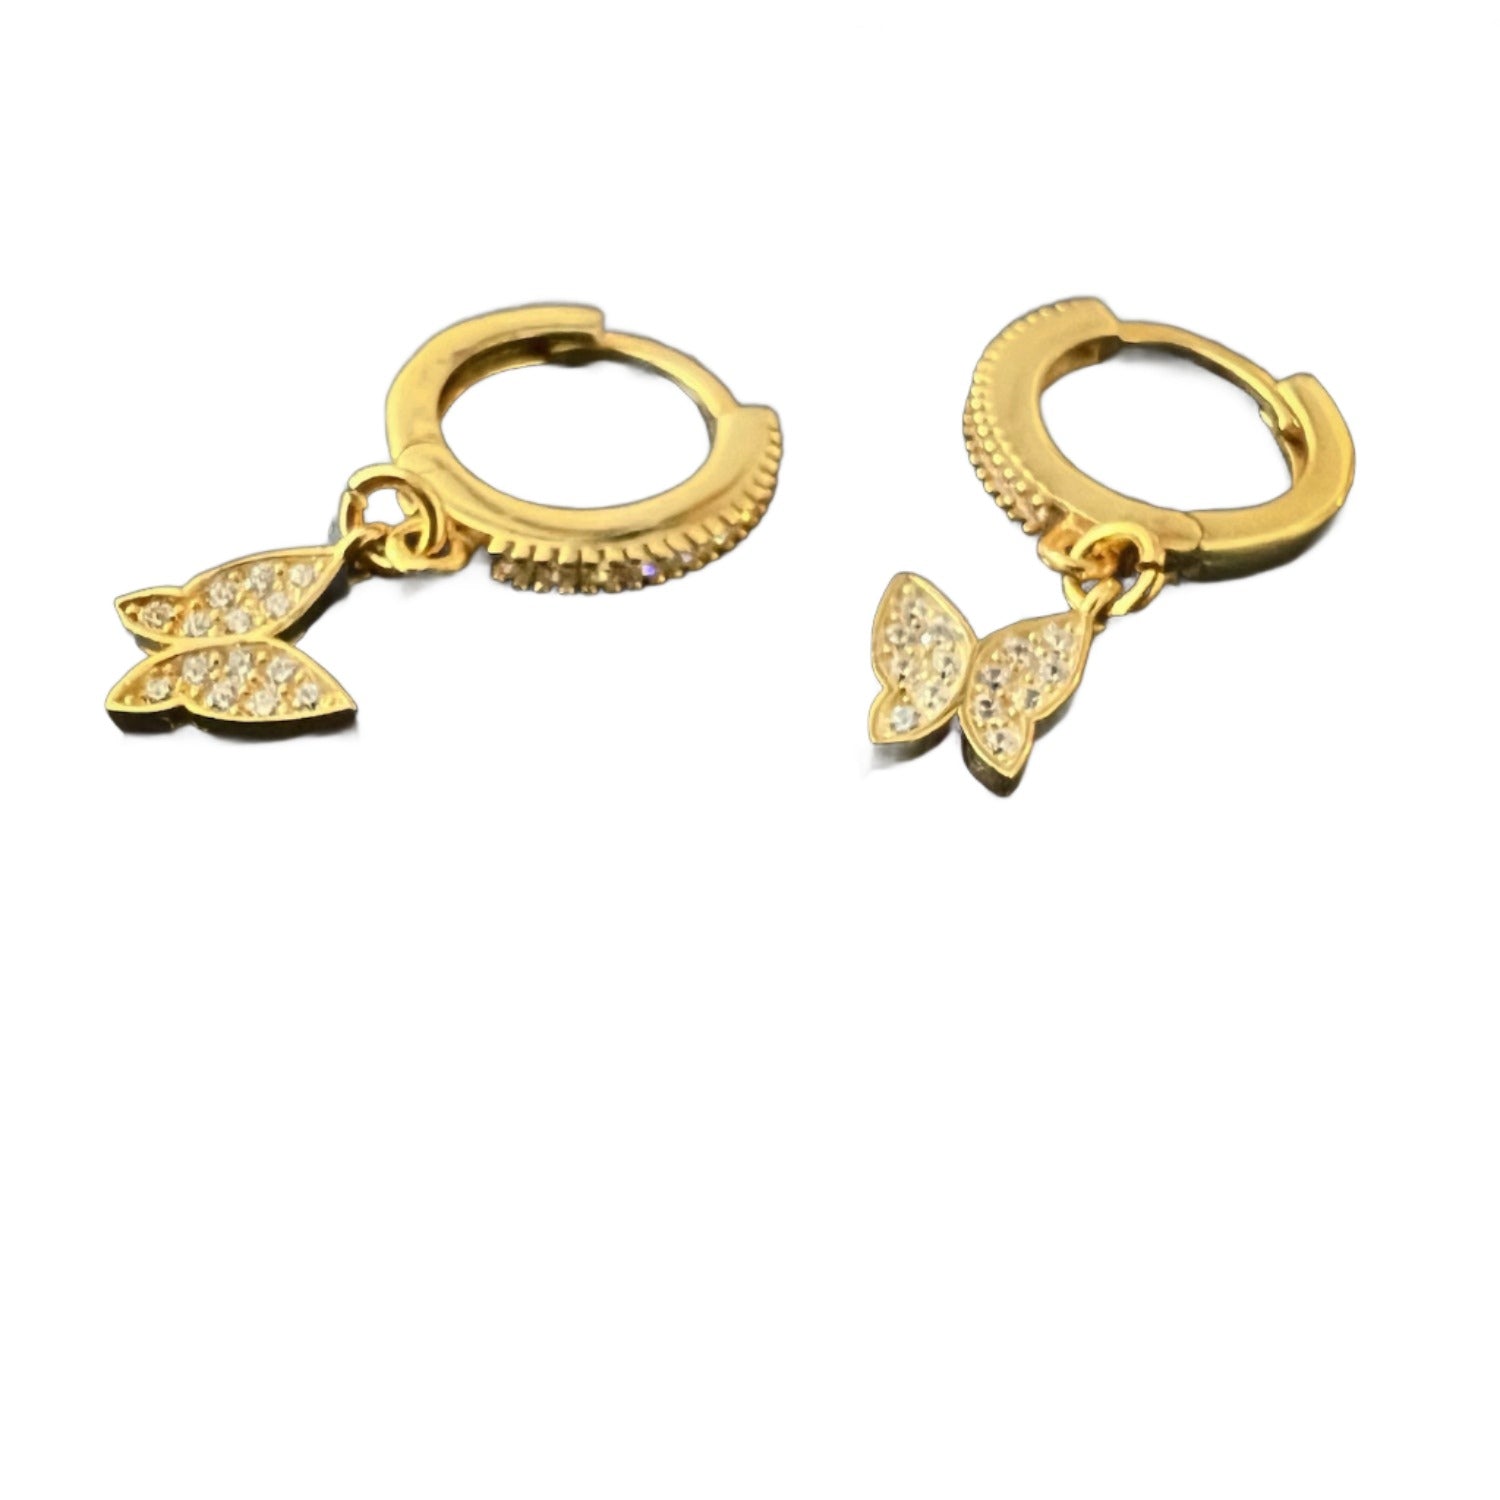 Delicate butterfly design earrings in sterling silver with 18K gold plating and shimmering CZ diamonds